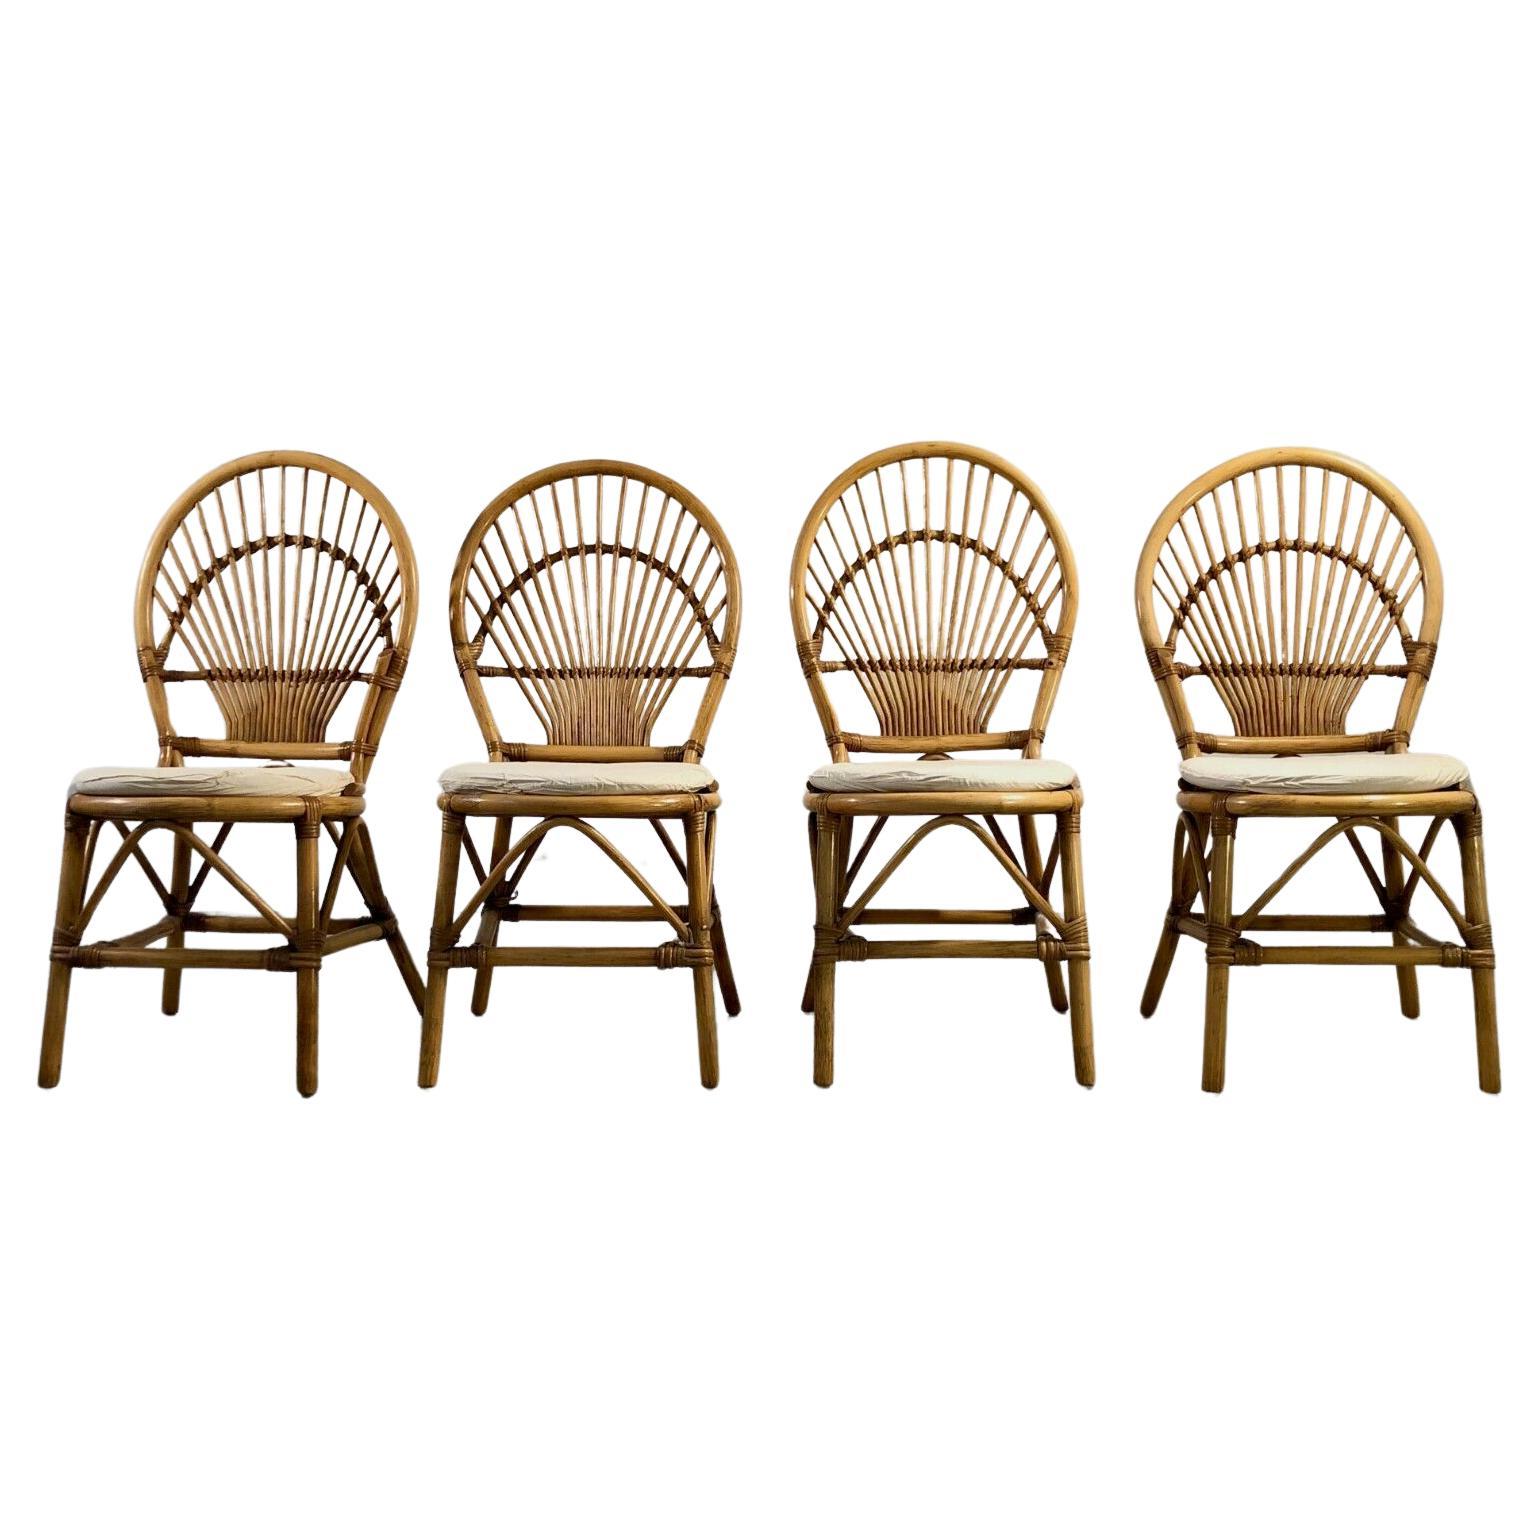 A Set of 4 SHABBY-CHIC BAMBOO Chairs in AUDOUX-MINNET Style, France 1970